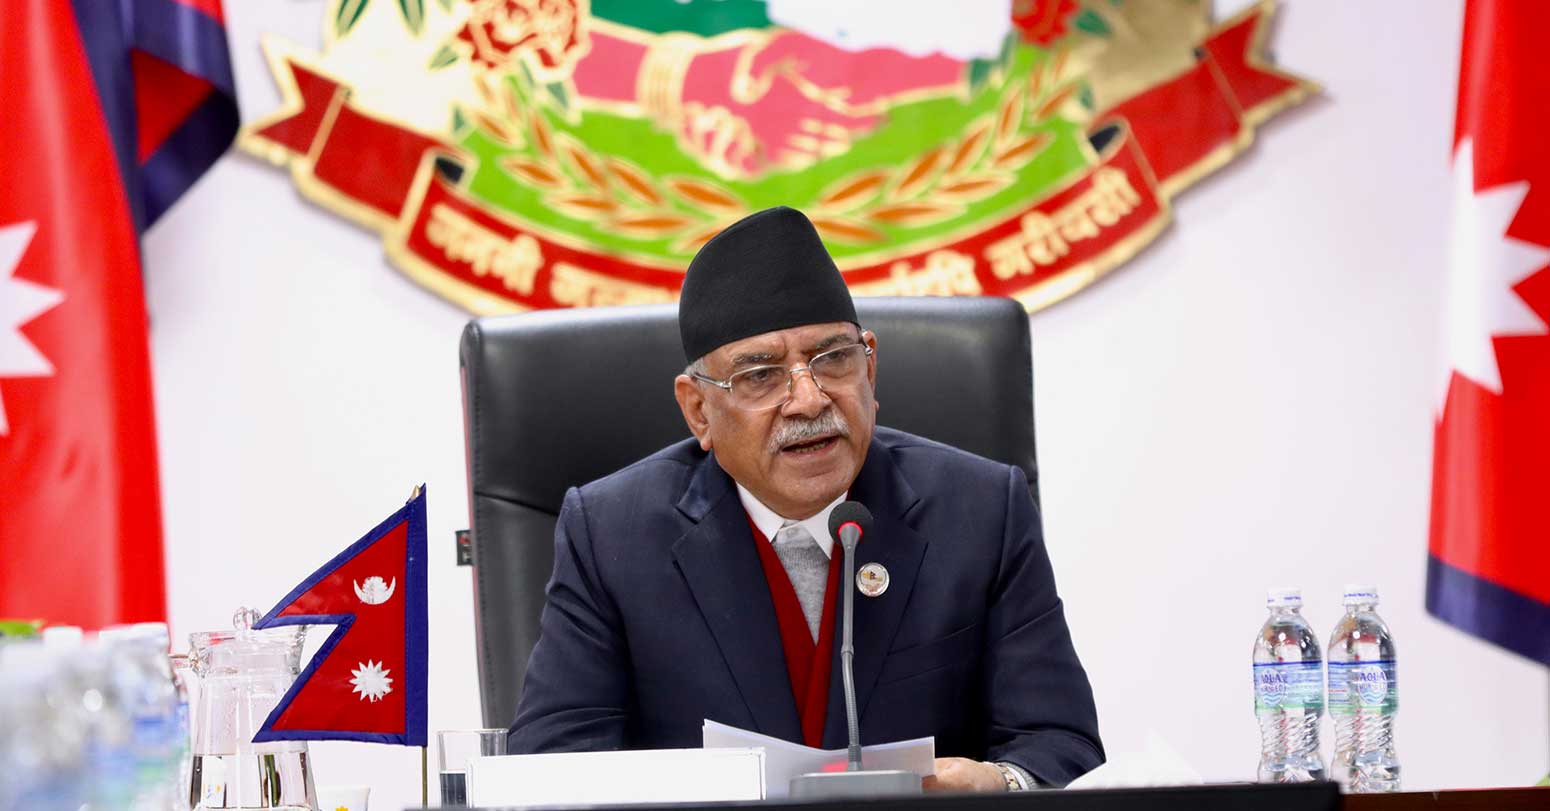 PM Prachanda will take the vote of confidence on March 20